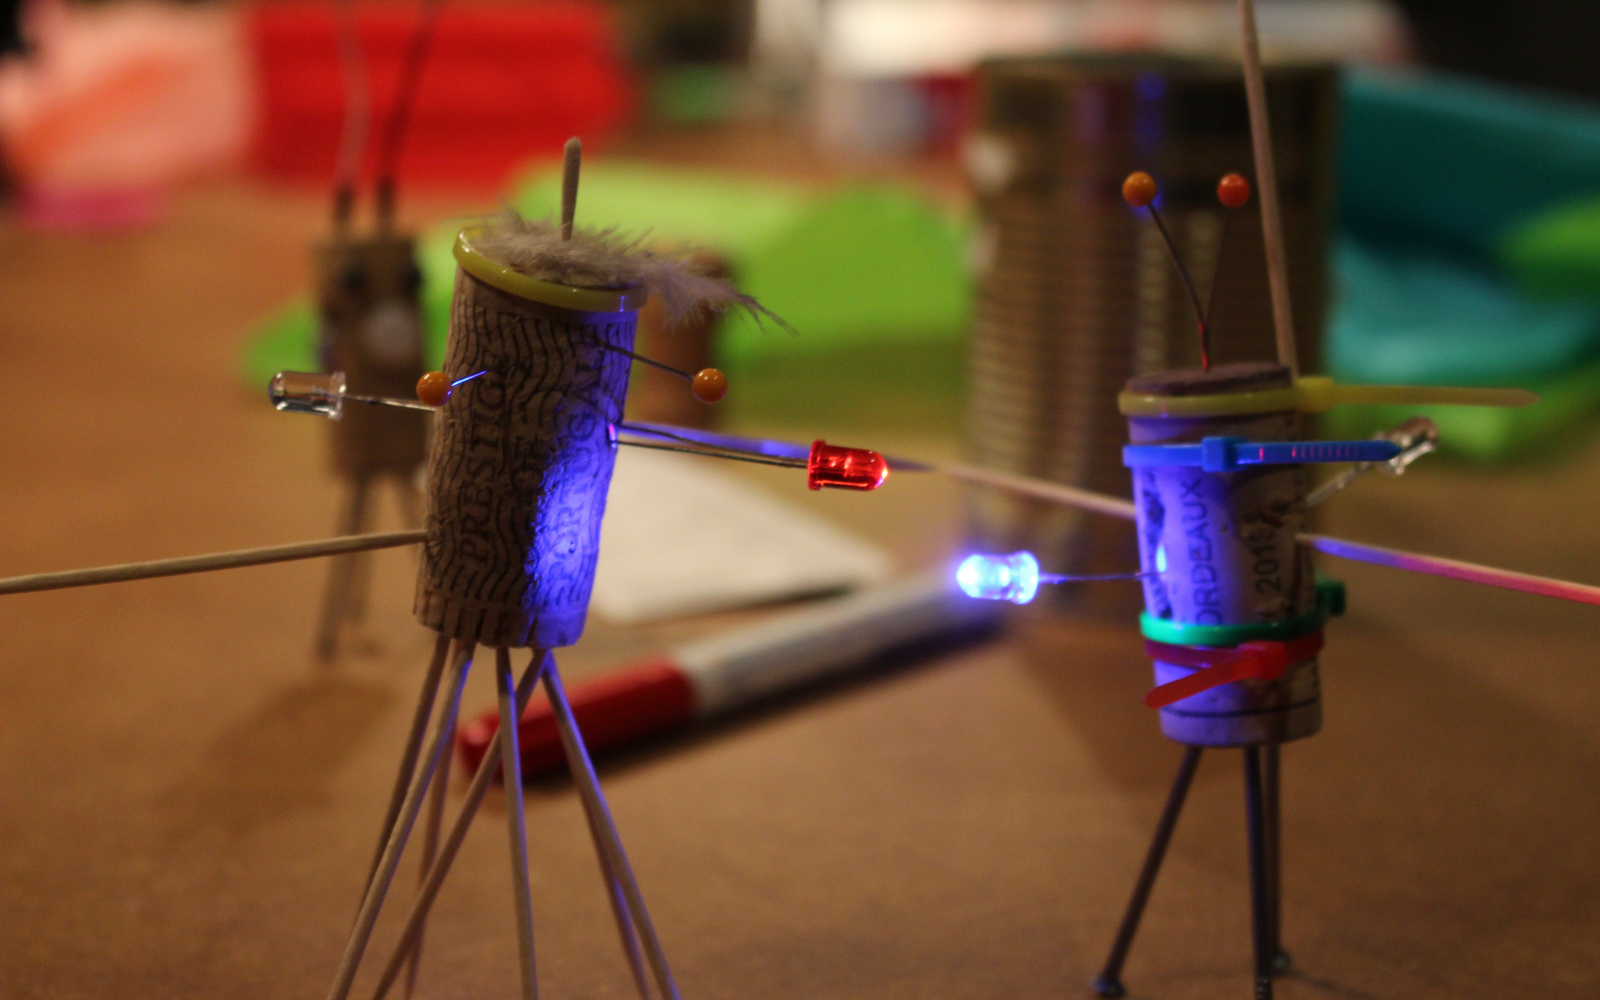 A pair of korks, that are turned into little figurines with LEDs are sitting on a table with crafting materials around them.